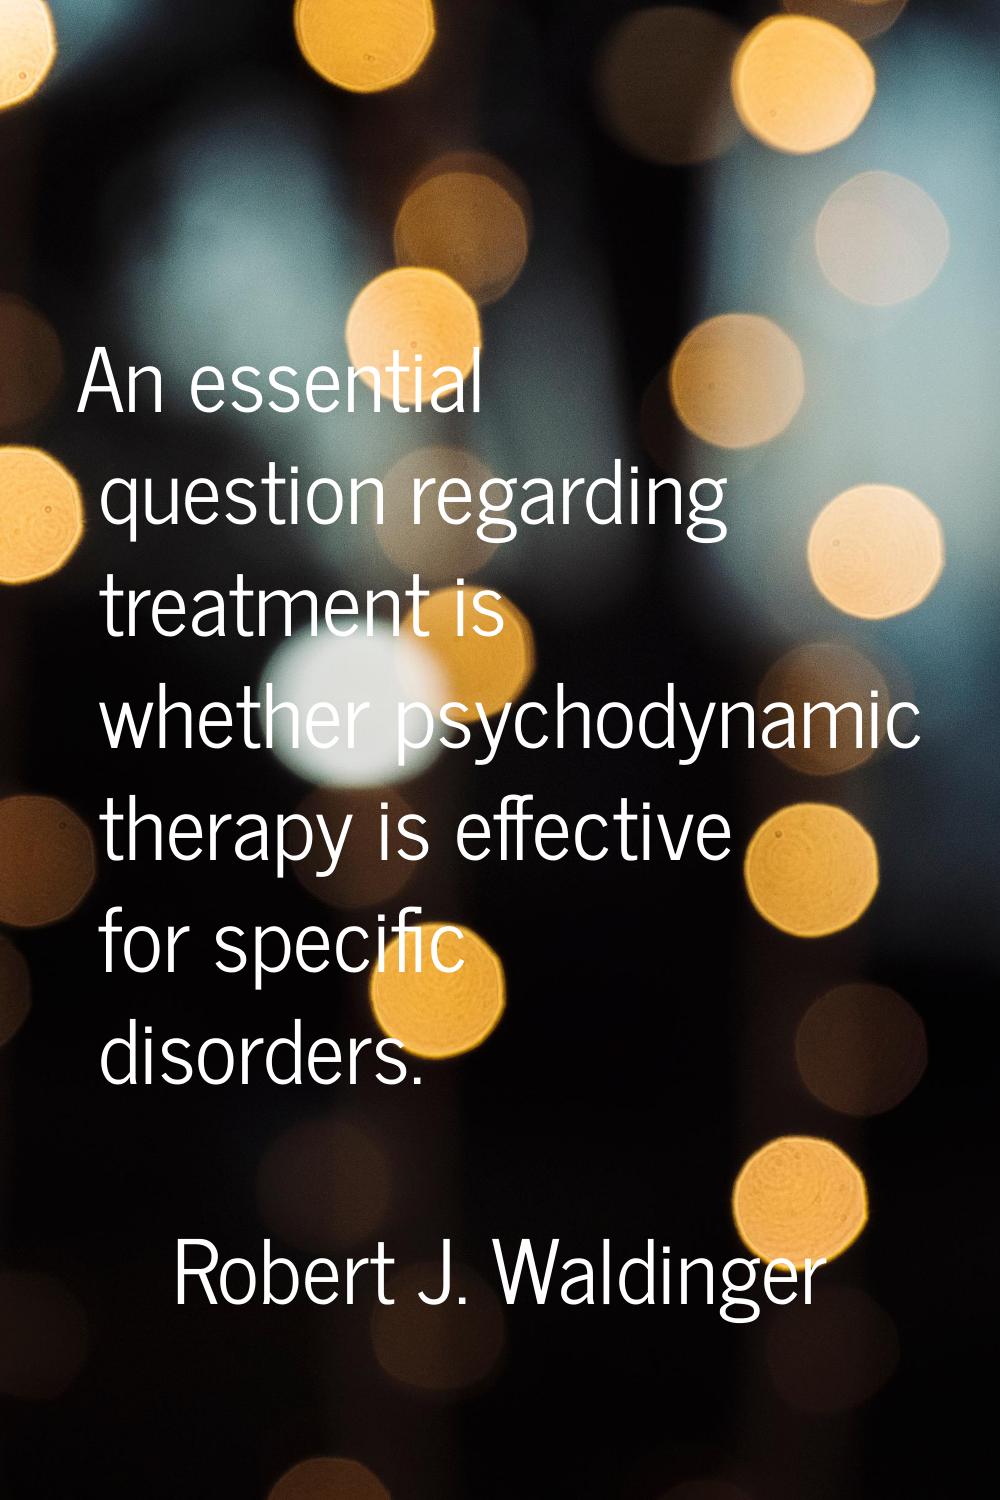 An essential question regarding treatment is whether psychodynamic therapy is effective for specifi